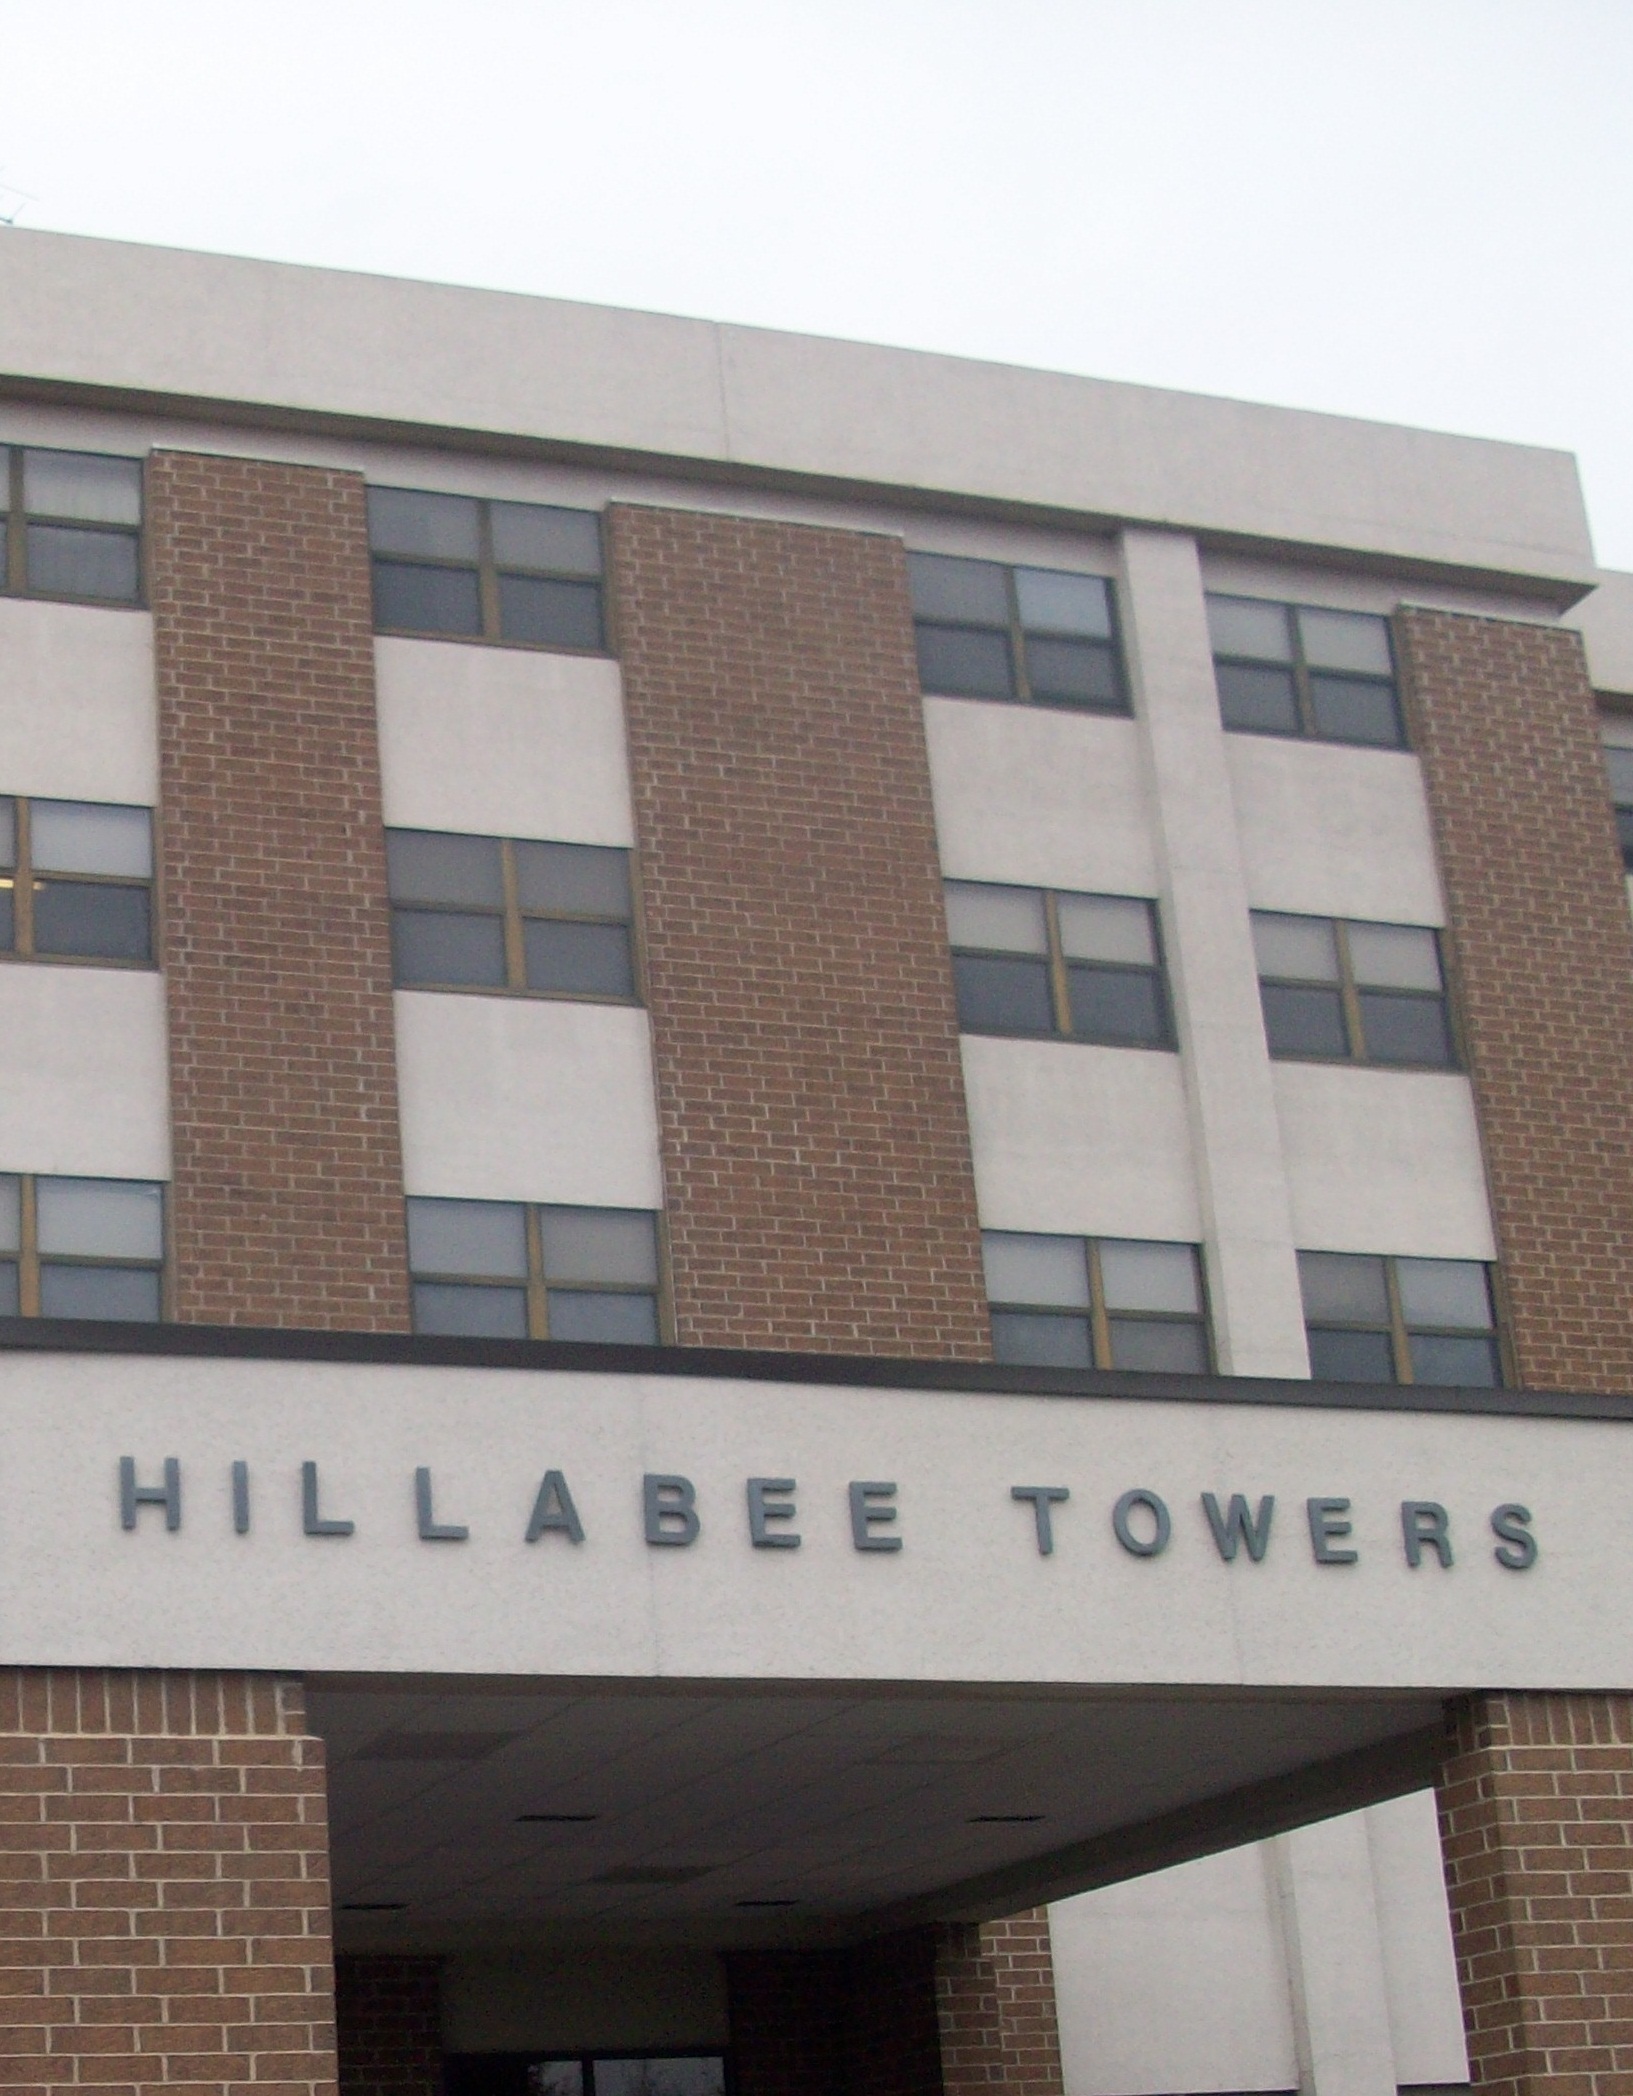 HILLABEE TOWERS